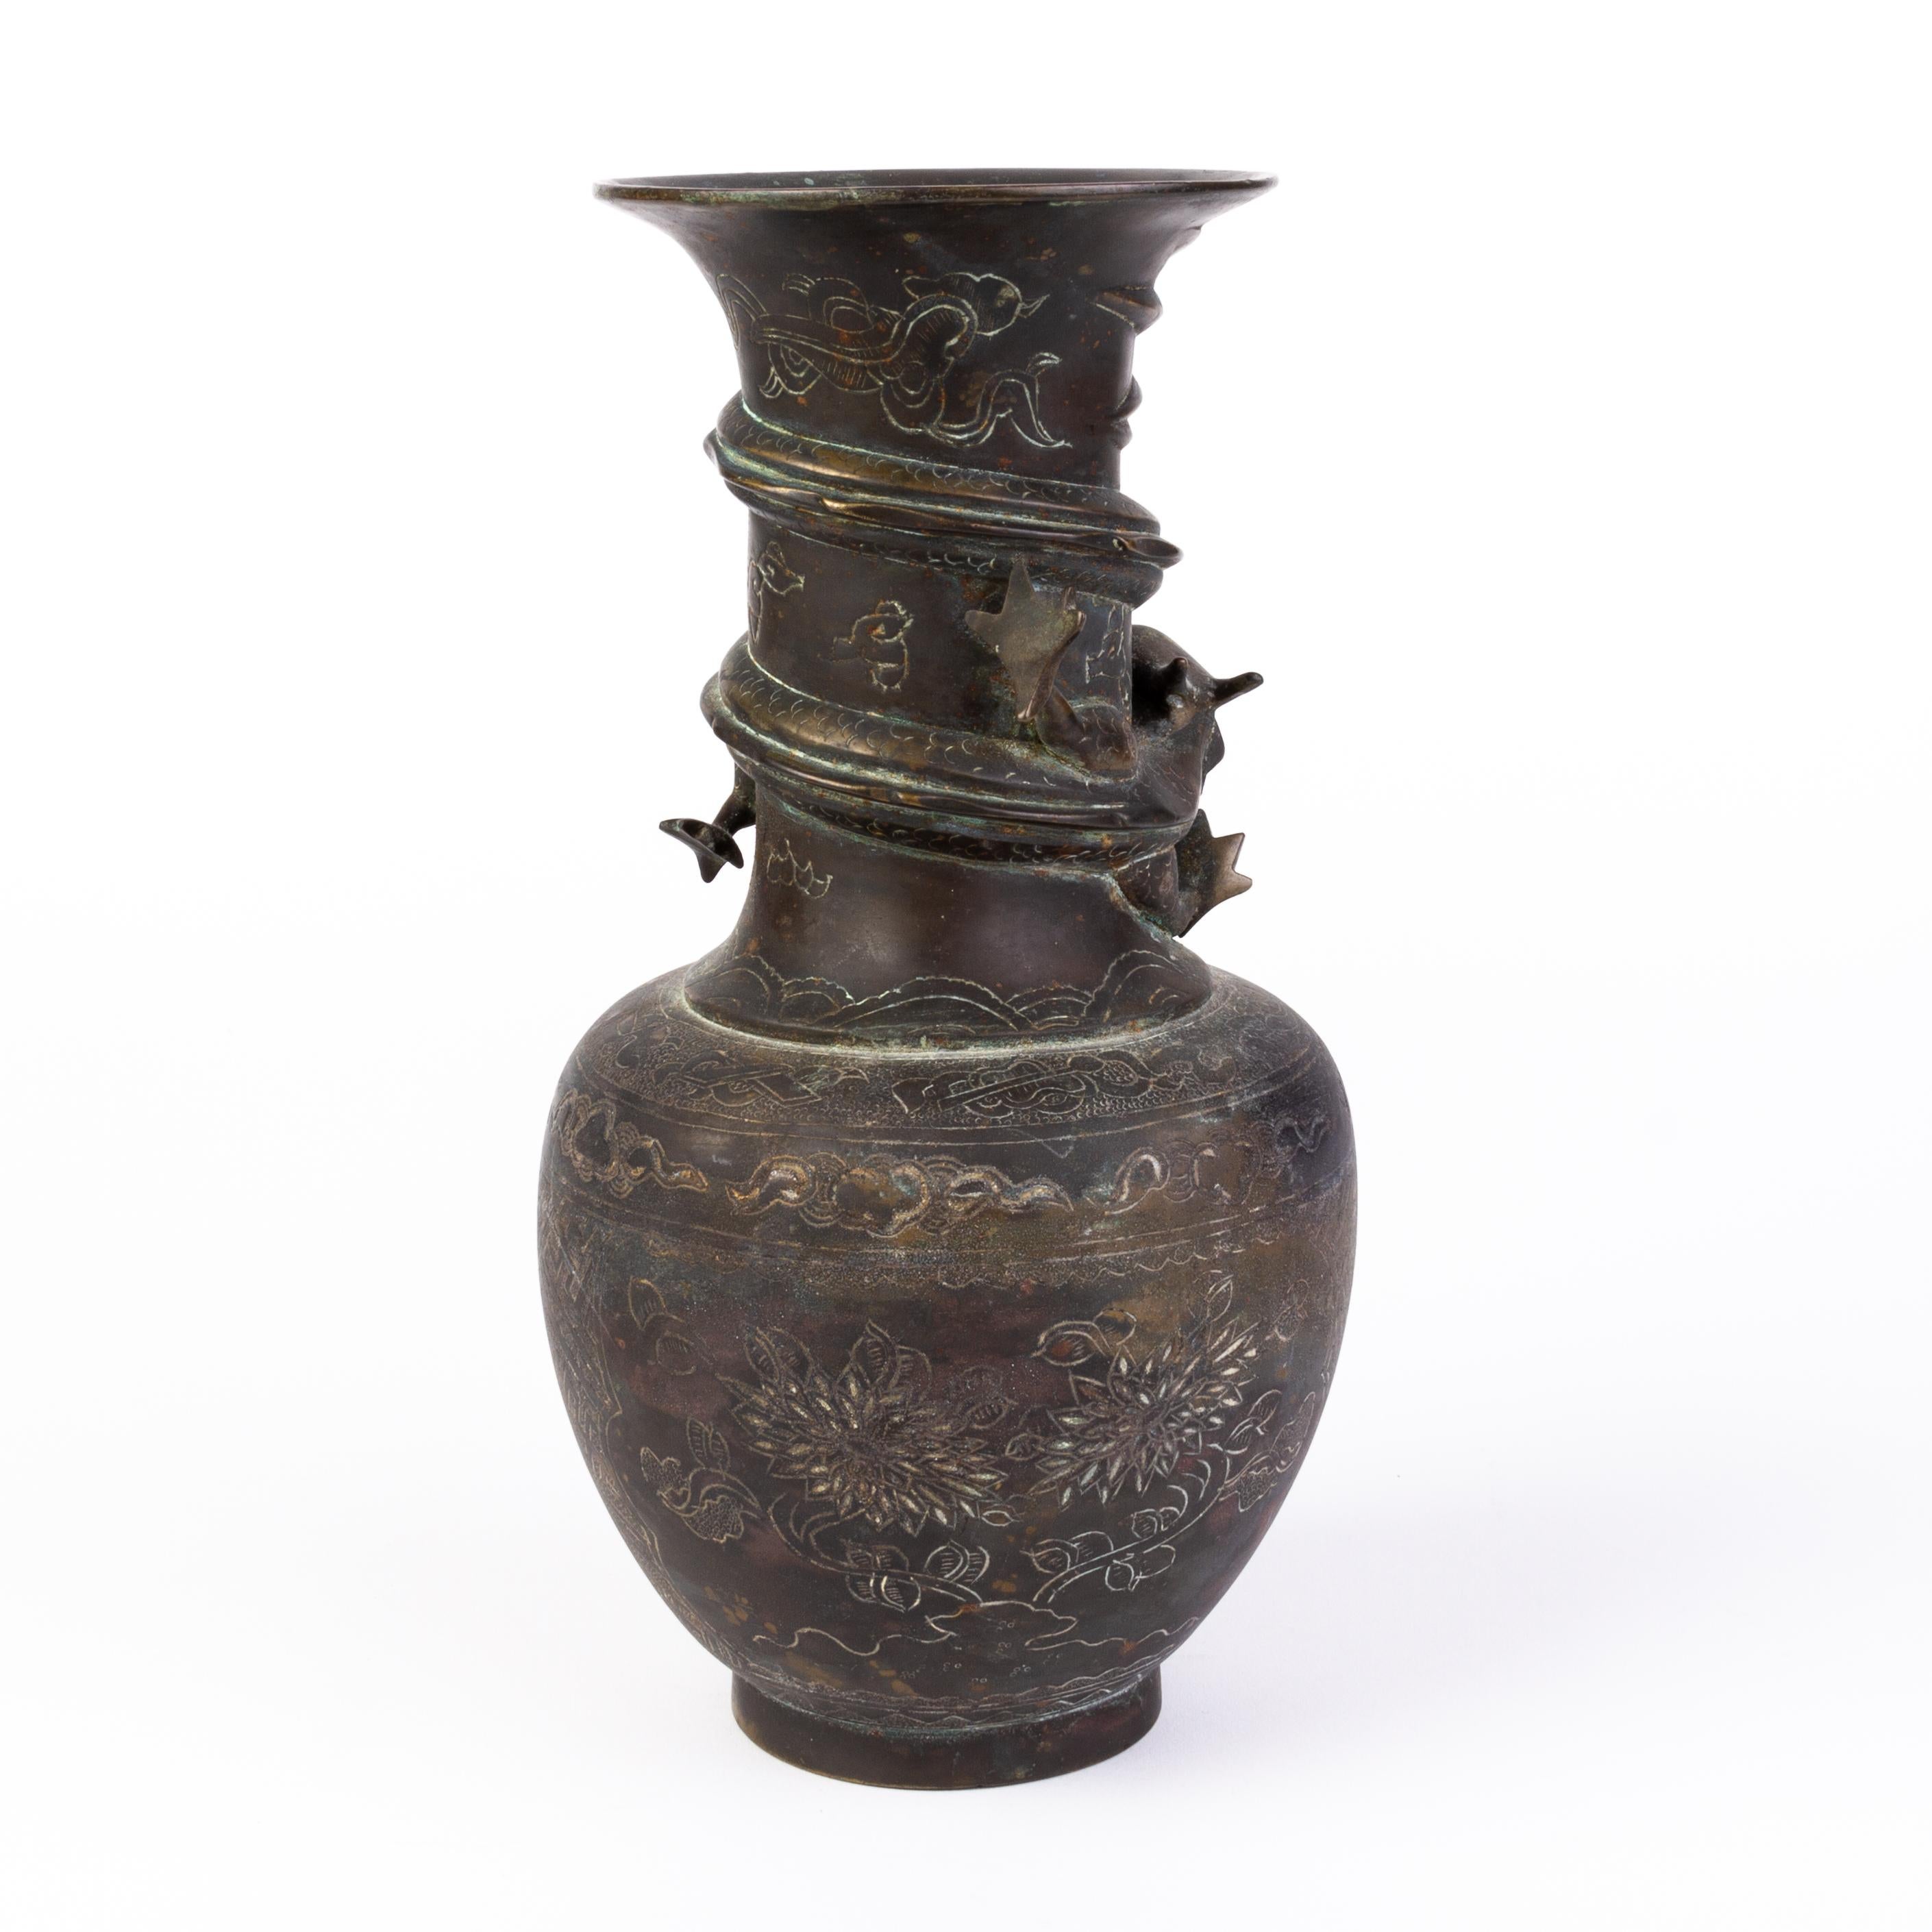 Late 19th century Japanese bronze vase, decorated with a swirling dragon.
Free international shipping.